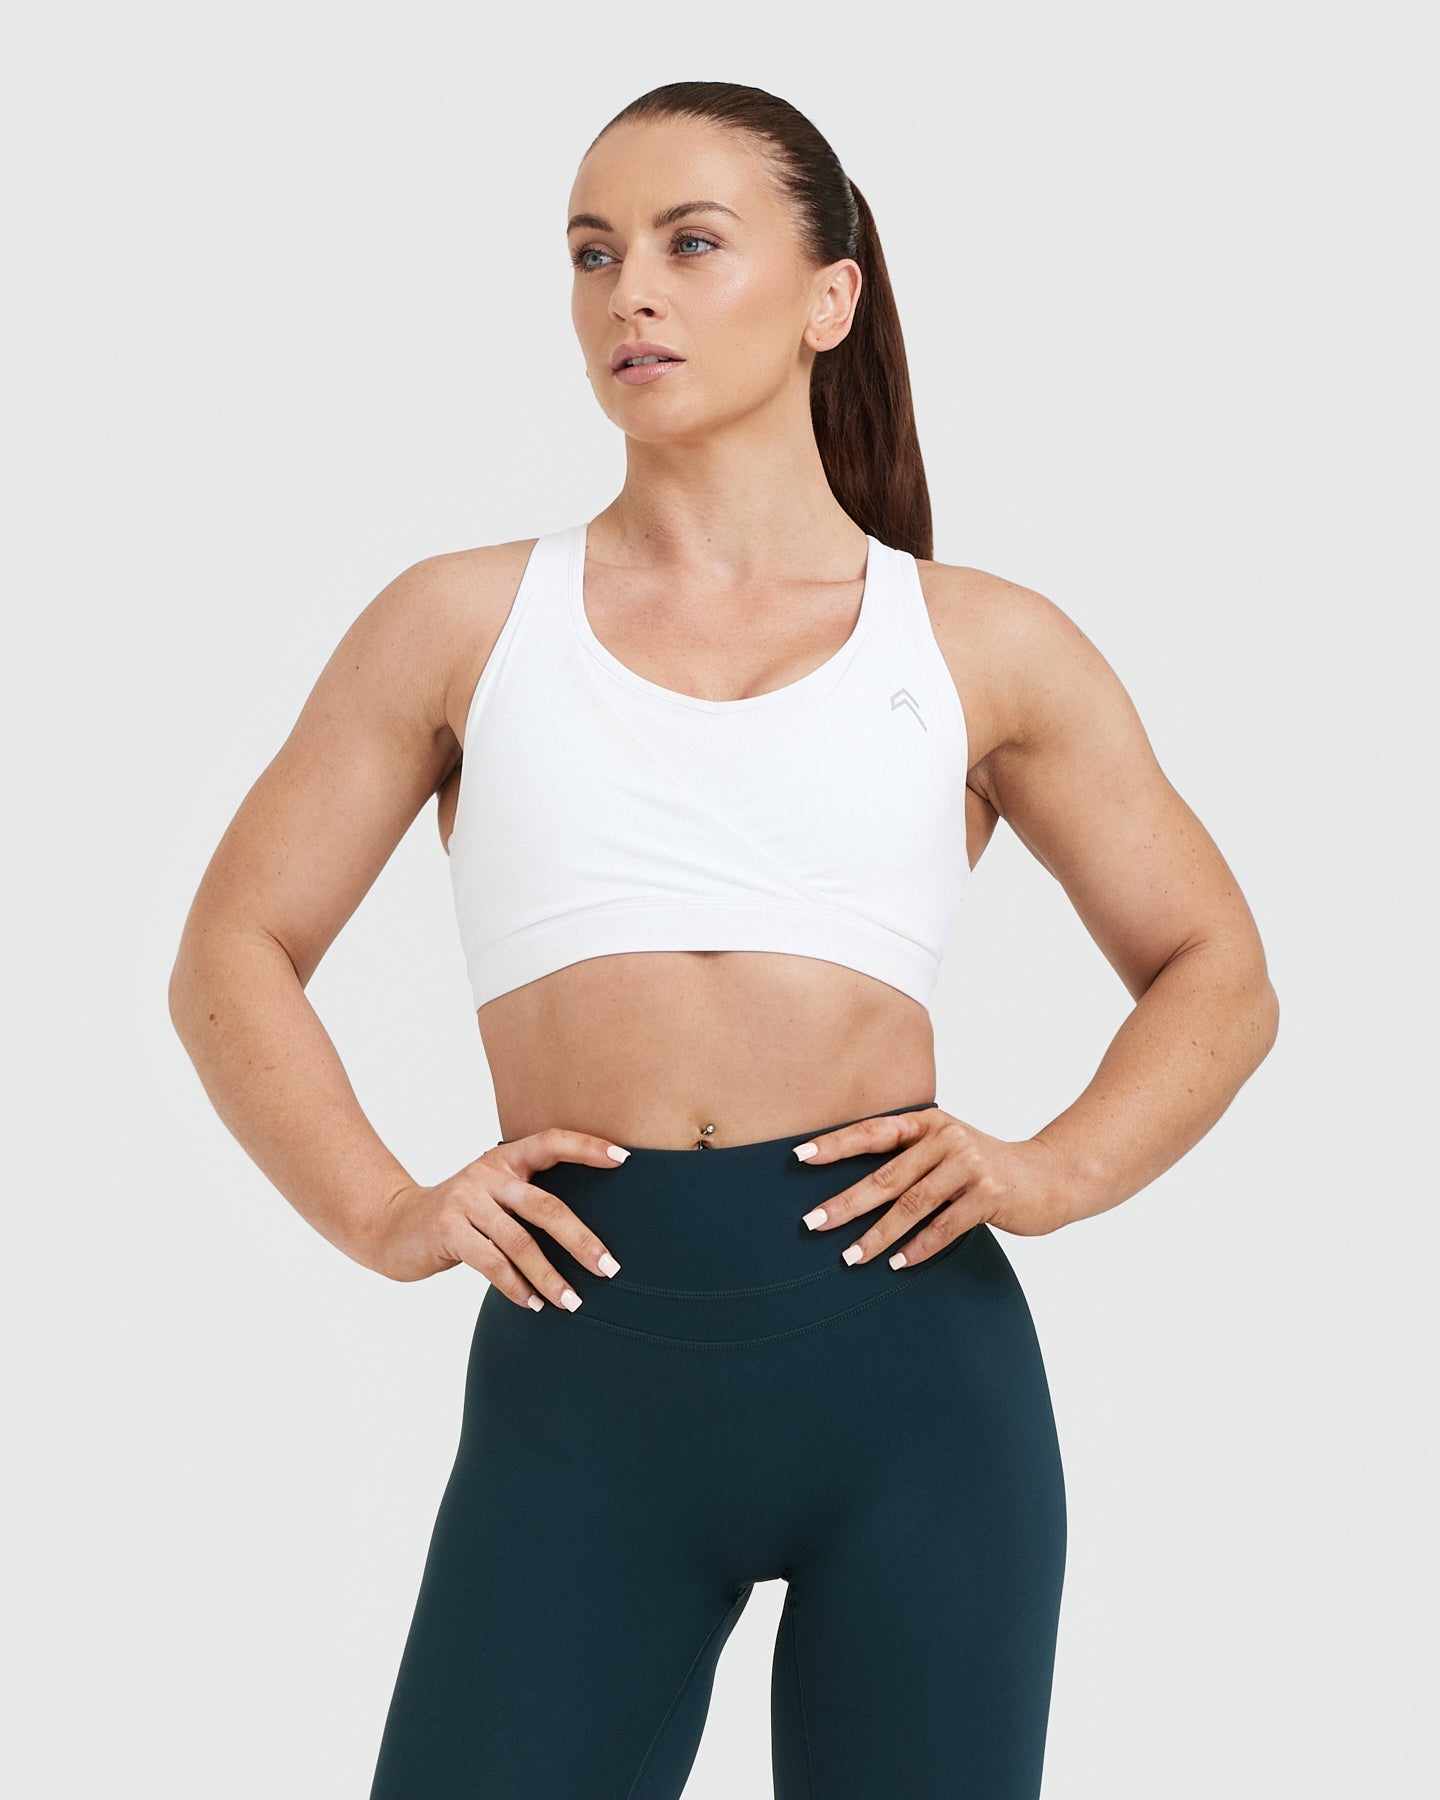 Incredible Sports bra, White  Designed for Intensive Training